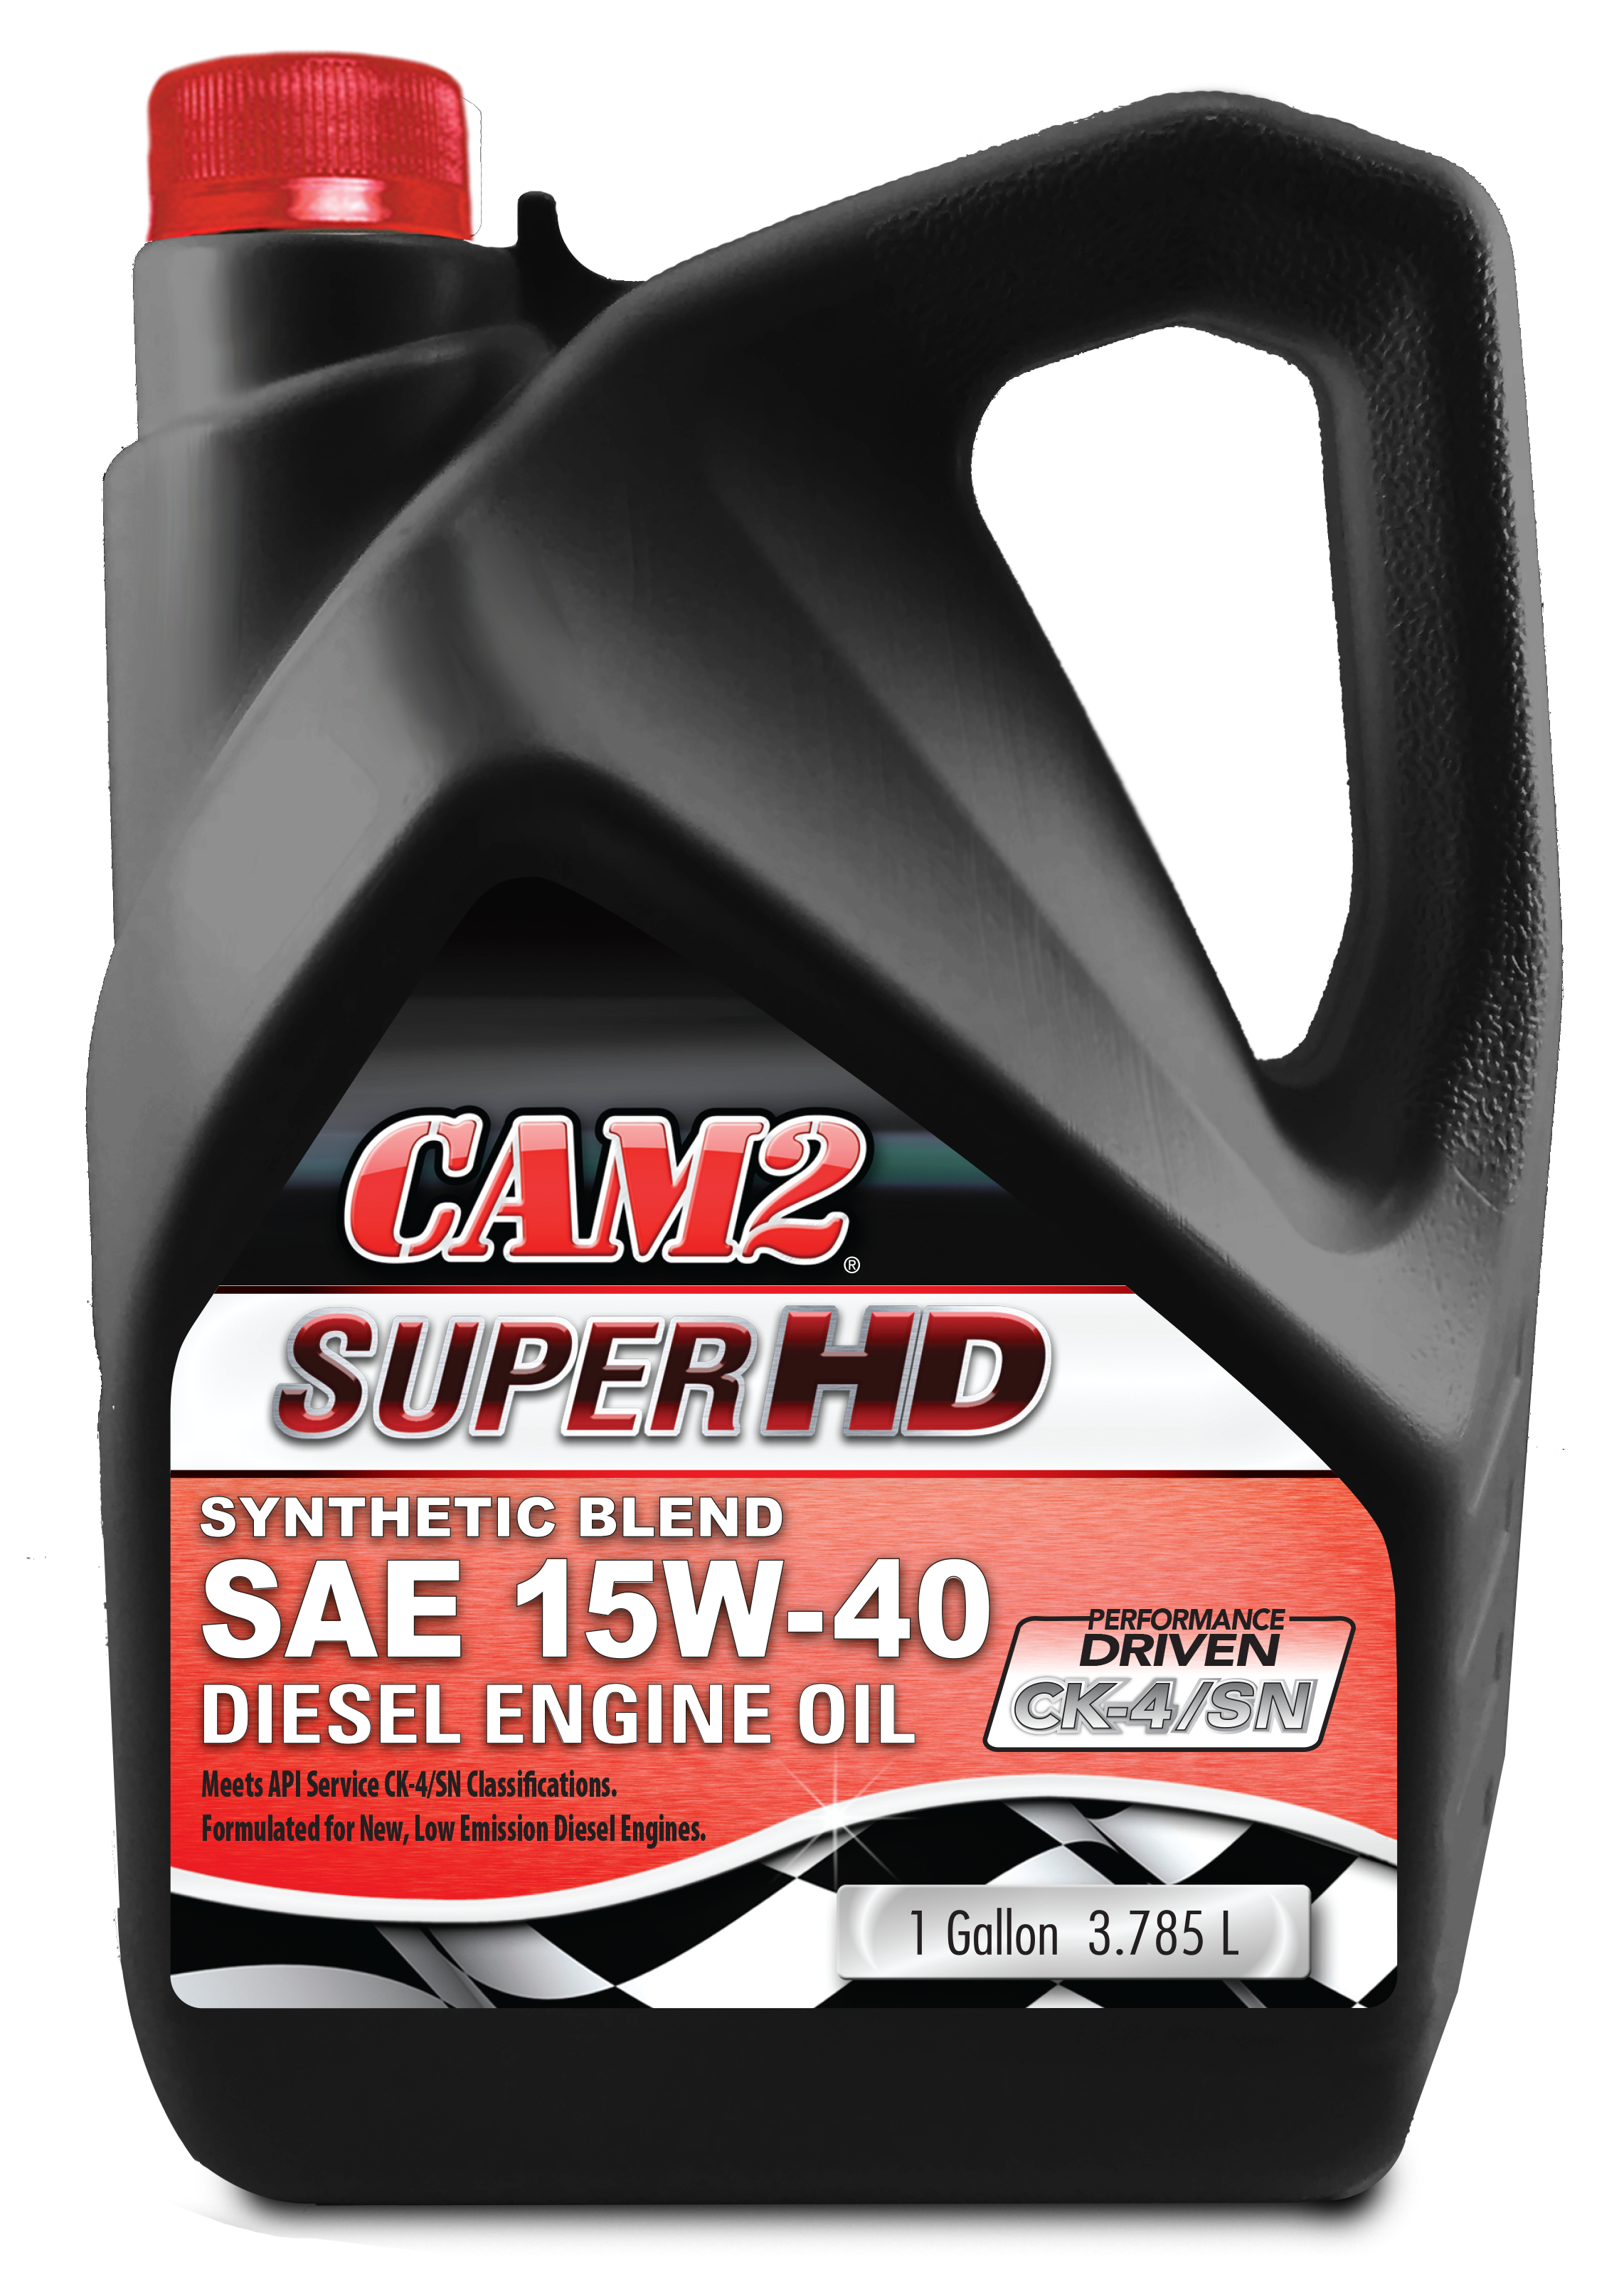 CAM2 SUPER HD 15W-40 PERFORMANCE DRIVEN CK-4/SN SYNTHETIC BLEND ENGINE OIL 80565-320